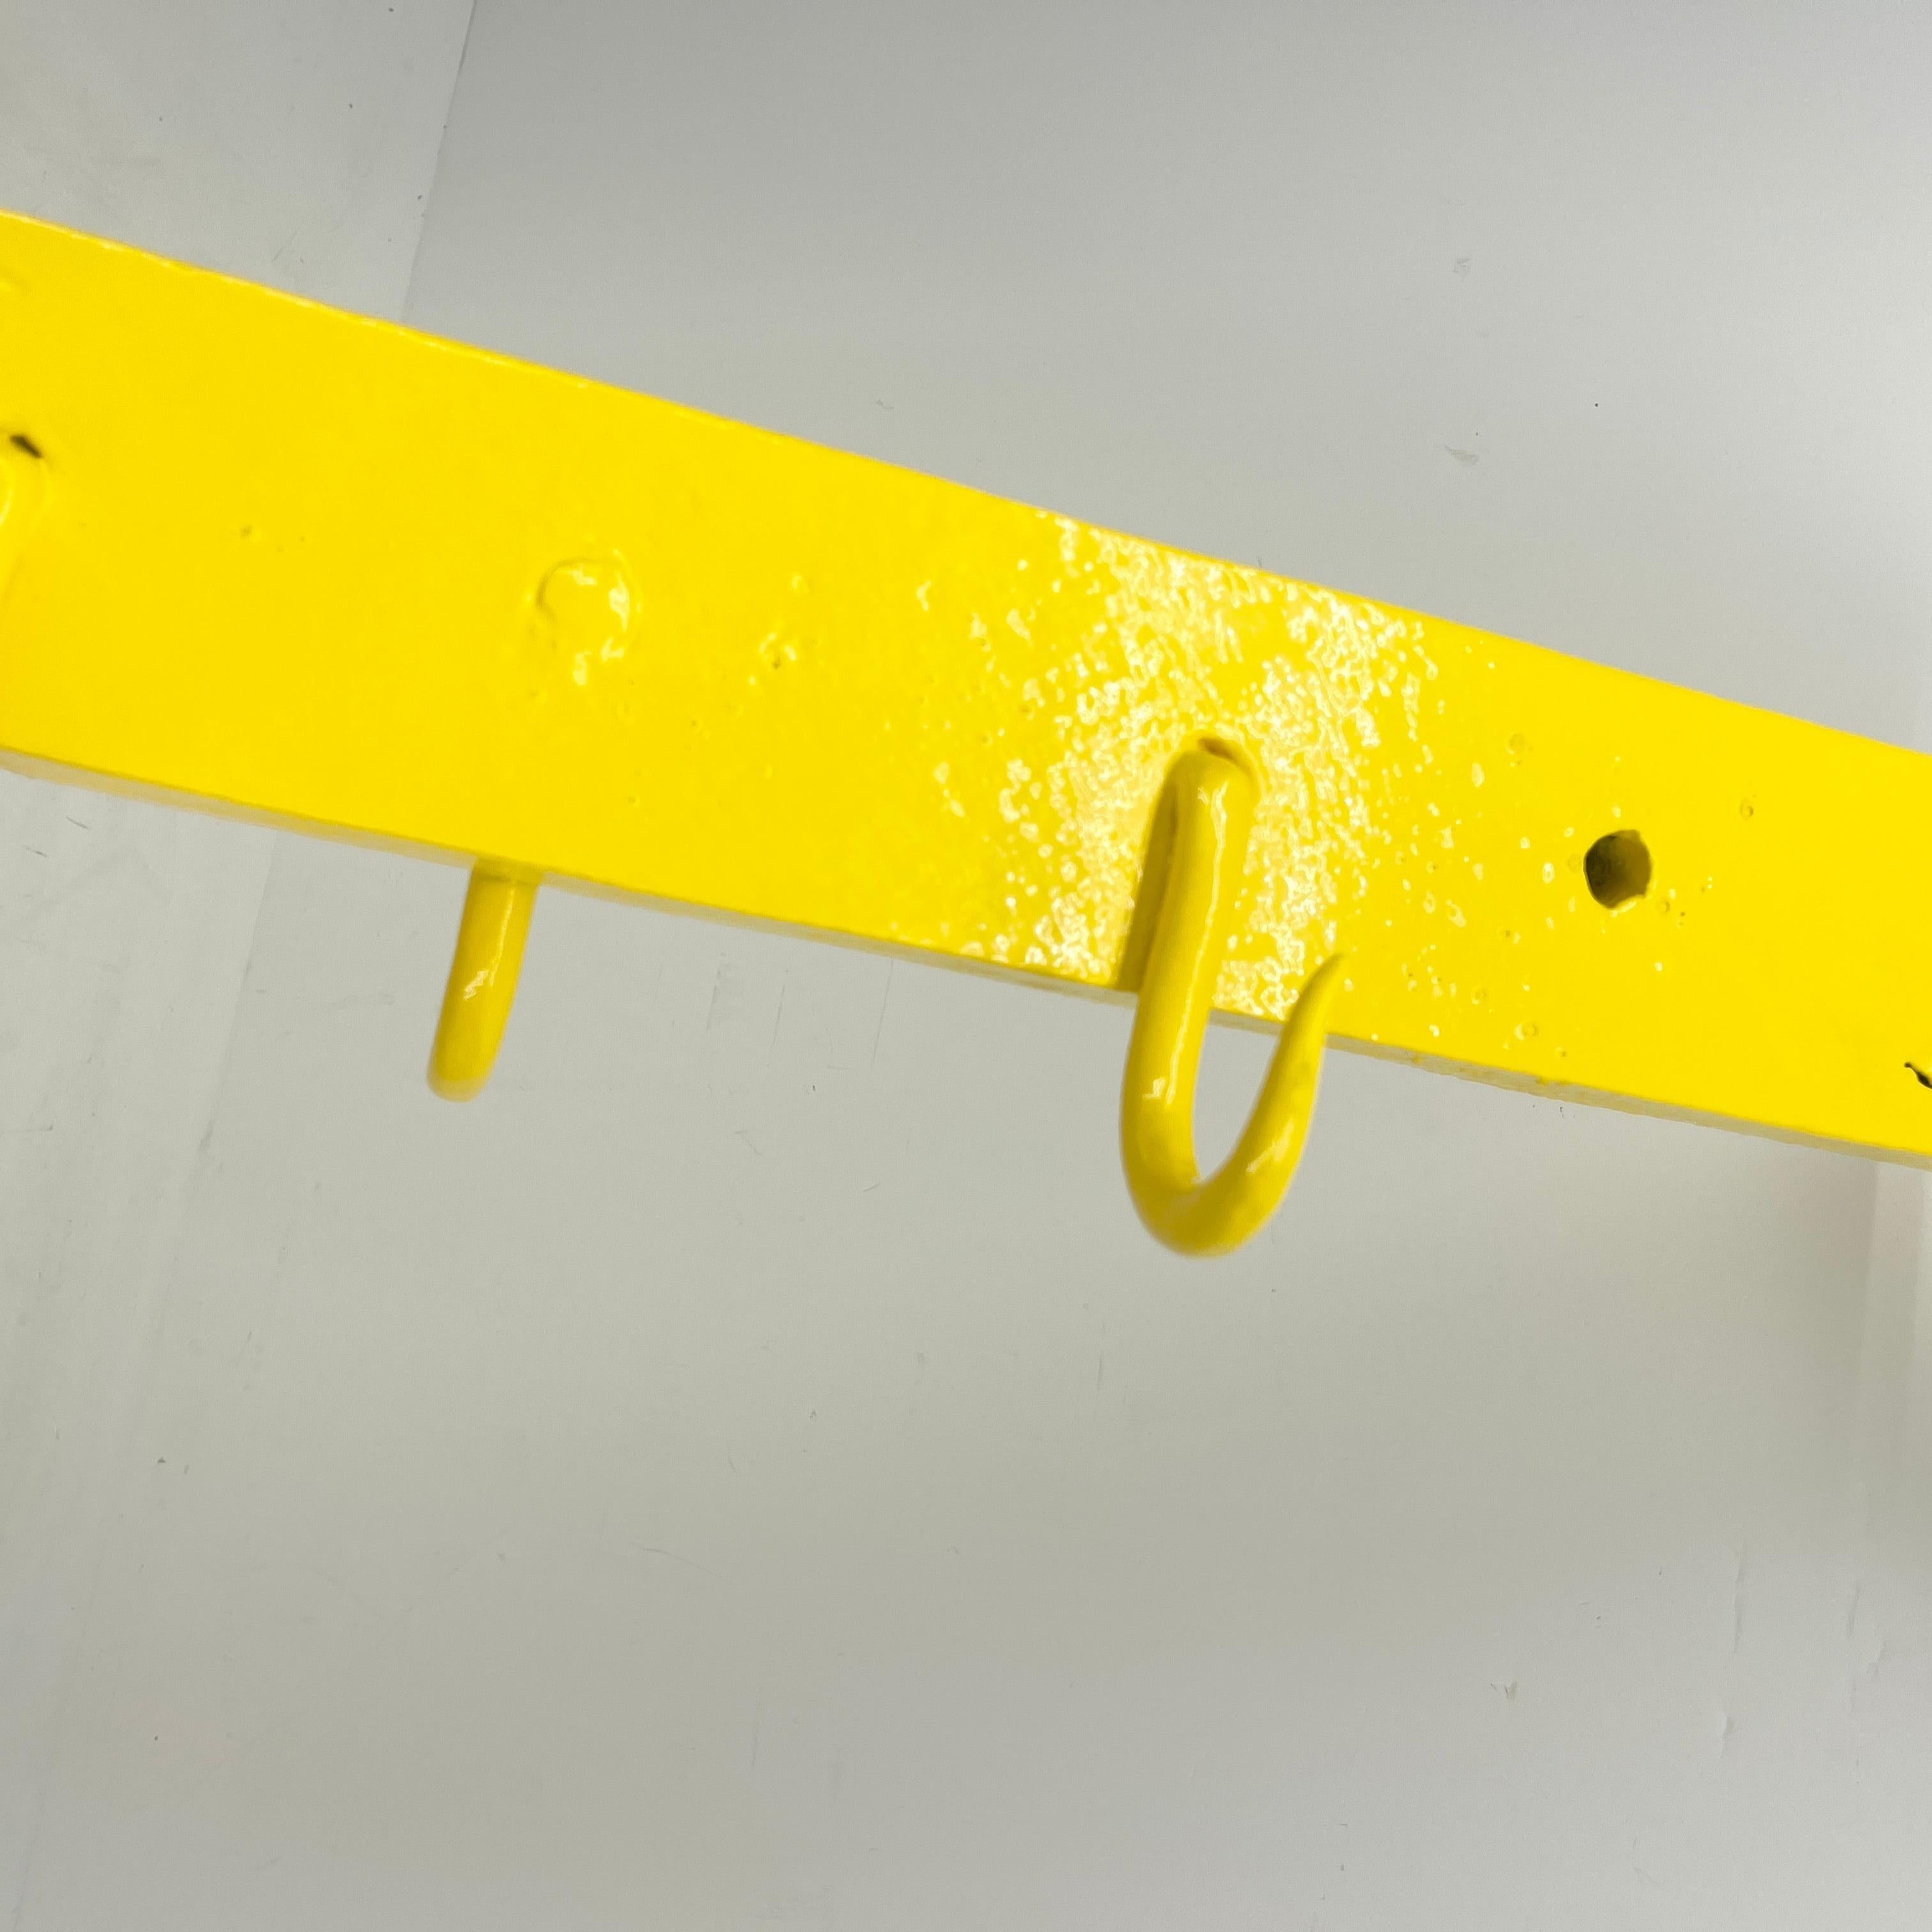 Mid-20th Century Industrial Size Kitchen Meat Hook in Bright Sunshine Yellow For Sale